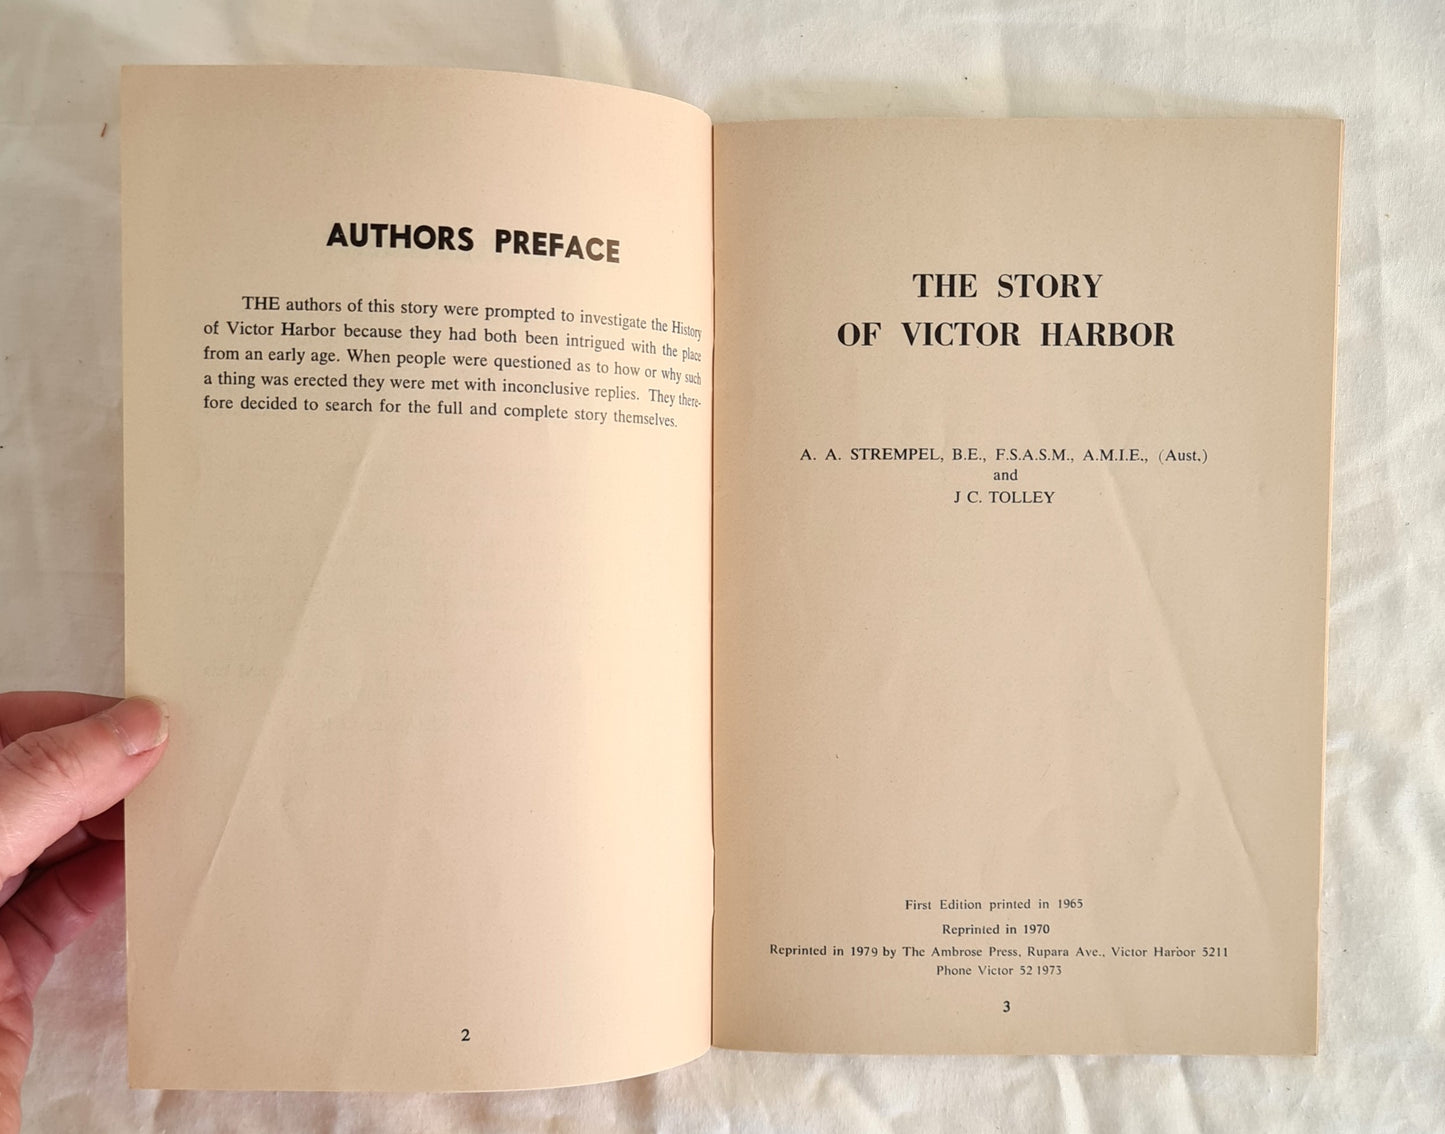 The Story of Victor Harbor by A. A. Strempel and J. C. Tolley